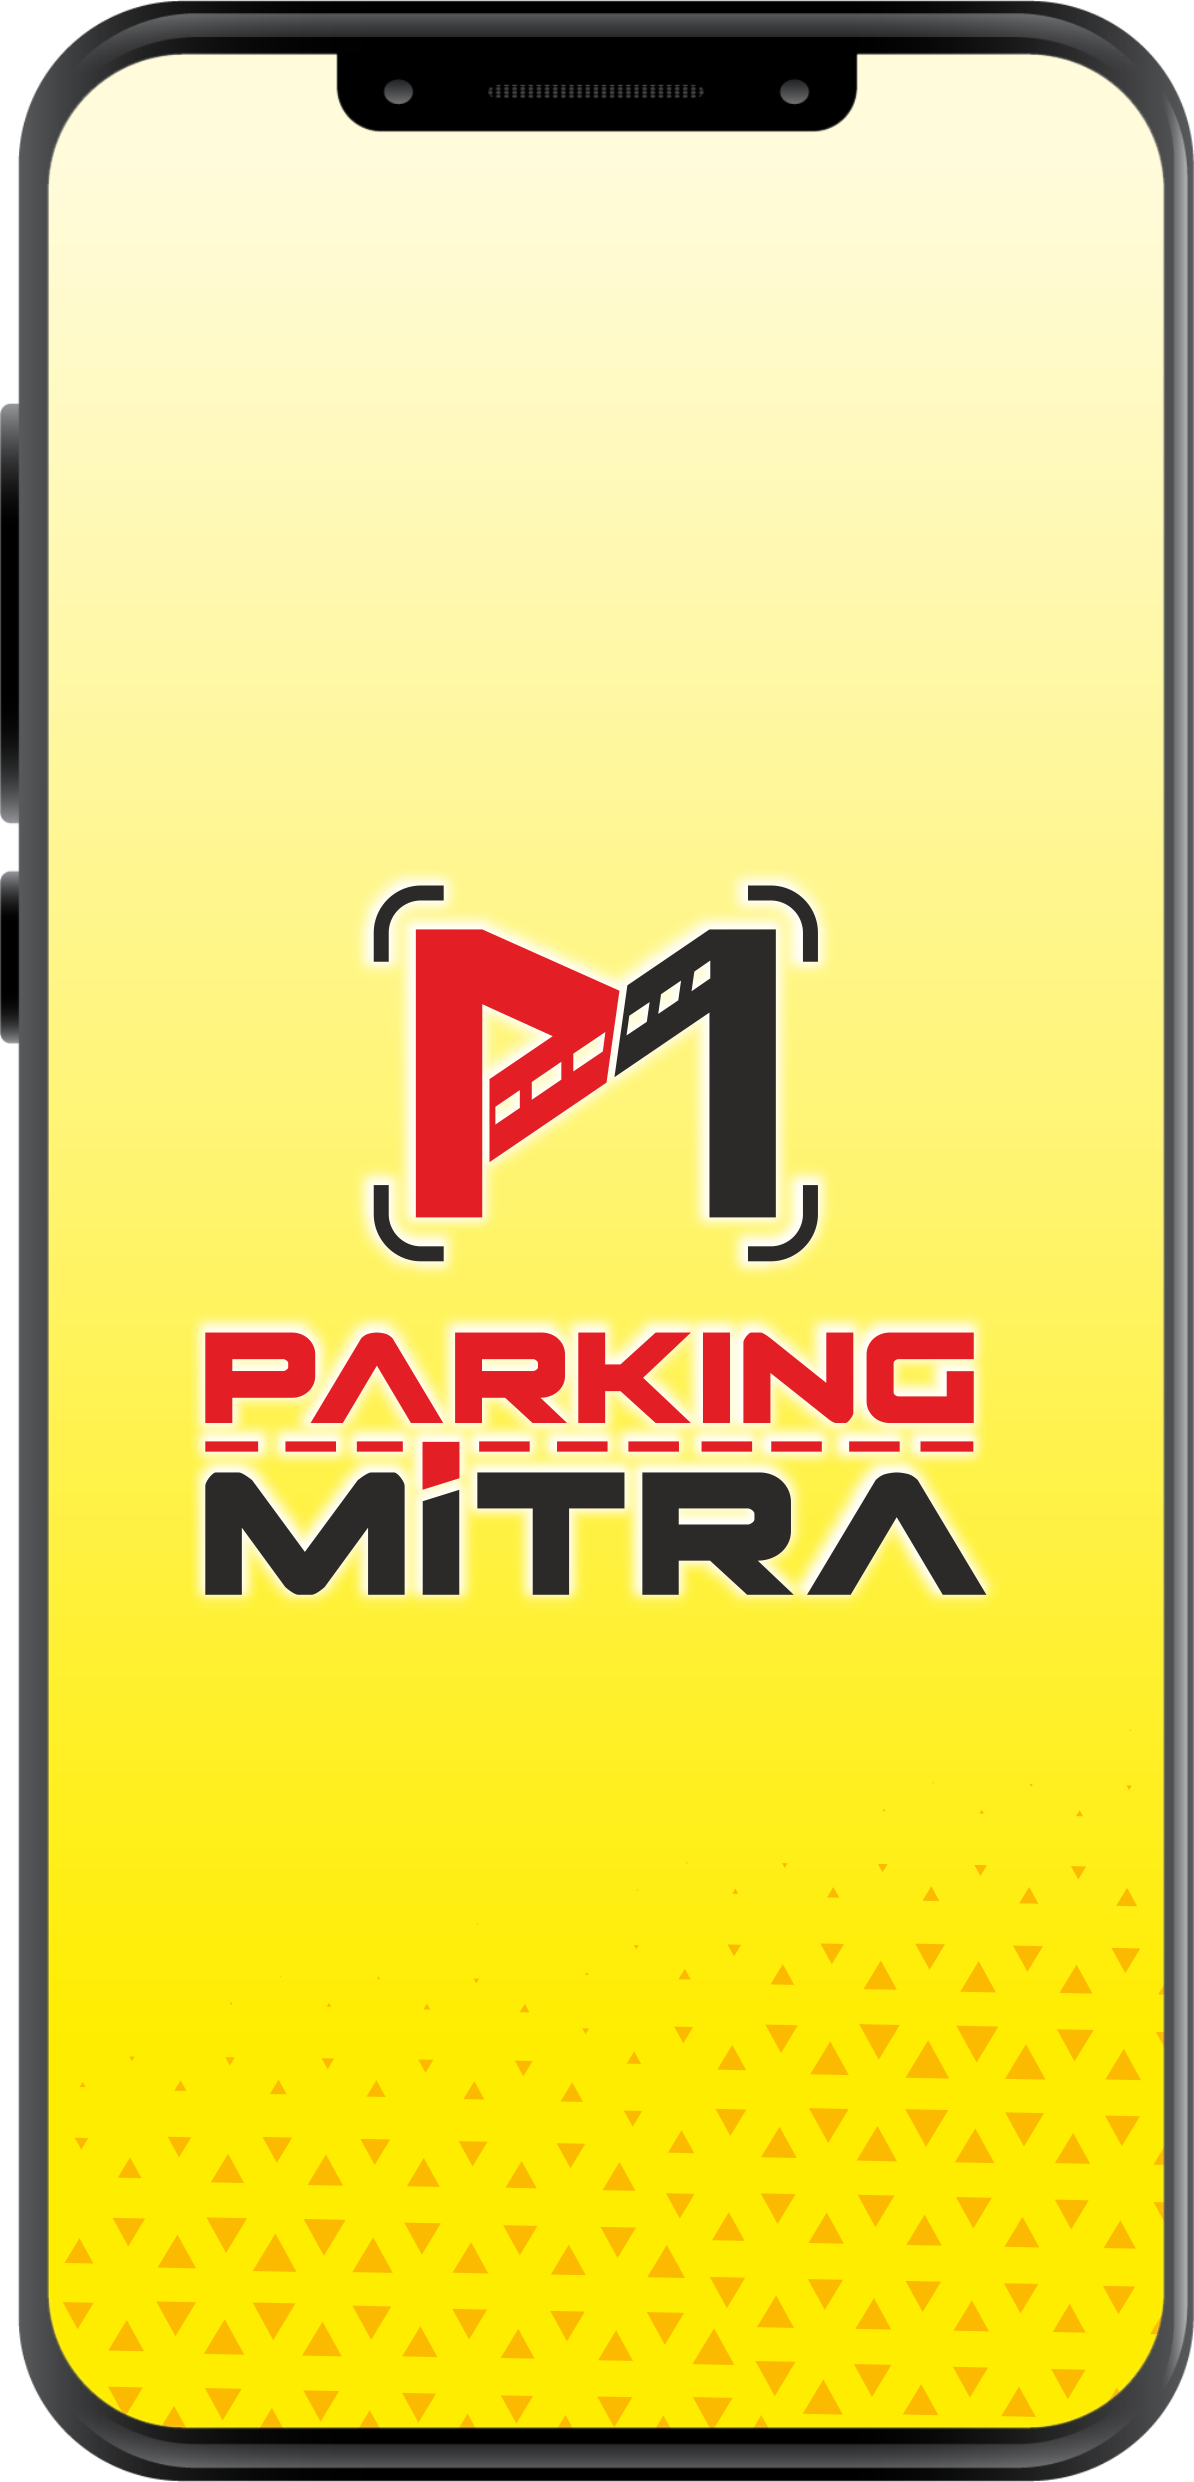 How To Install Parking Mitra